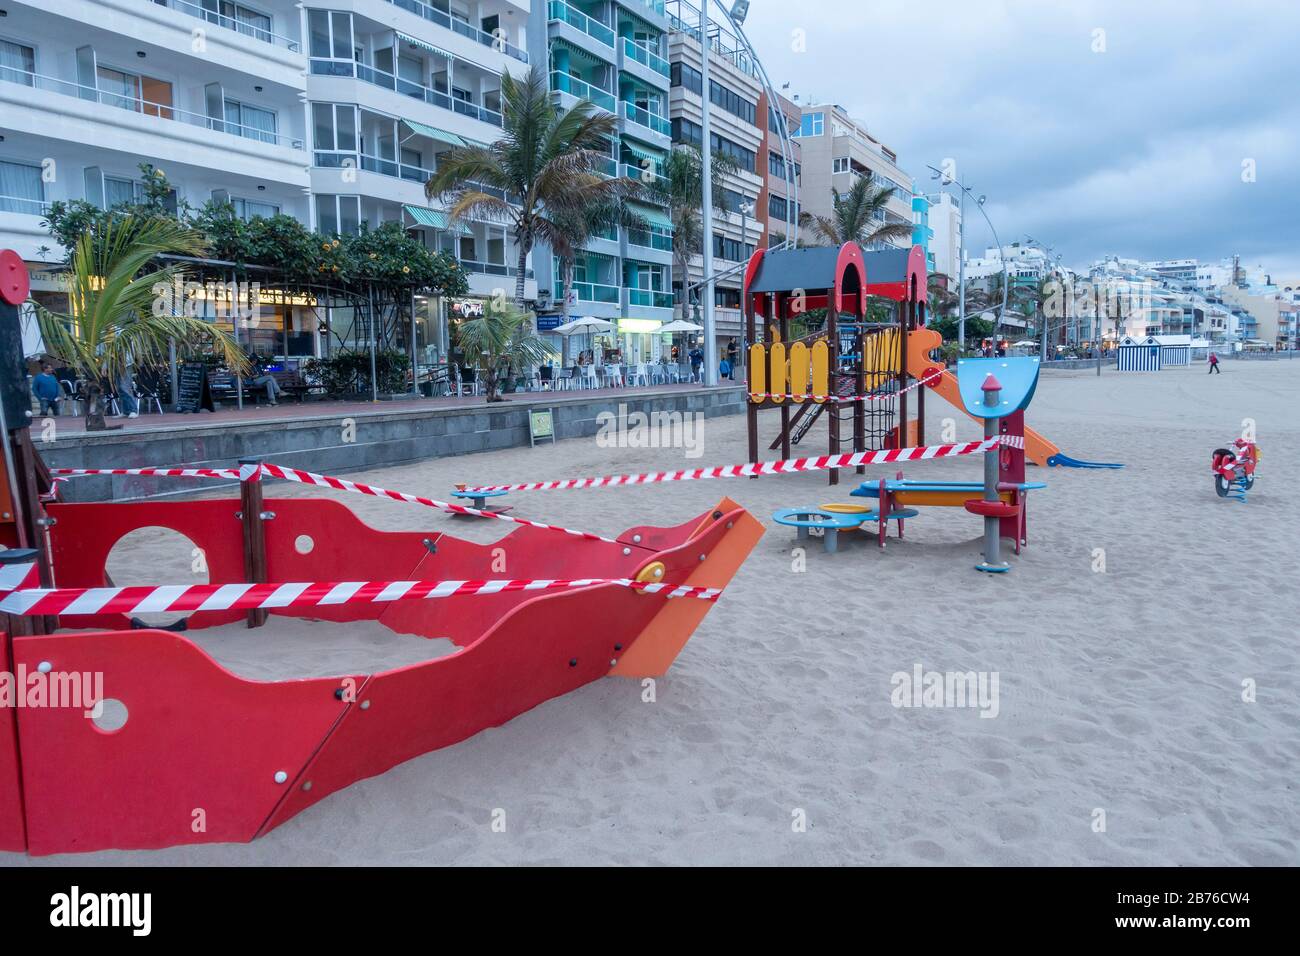 Las Palmas, Gran Canaria, Canary Islands, Spain. 13th March 2020. A beach playground is is taped off on the city beach in Las Palmas on Gran Canaria to prevent the spread of Coronavirus as the government delares a state of emergency as Coronavirus cases continue to rise in Spain. The Impact of travel restrictions and reduced number of tourists is a major concern for the Canary Islands. Credit: Alan Dawson/Alamy Live News Stock Photo